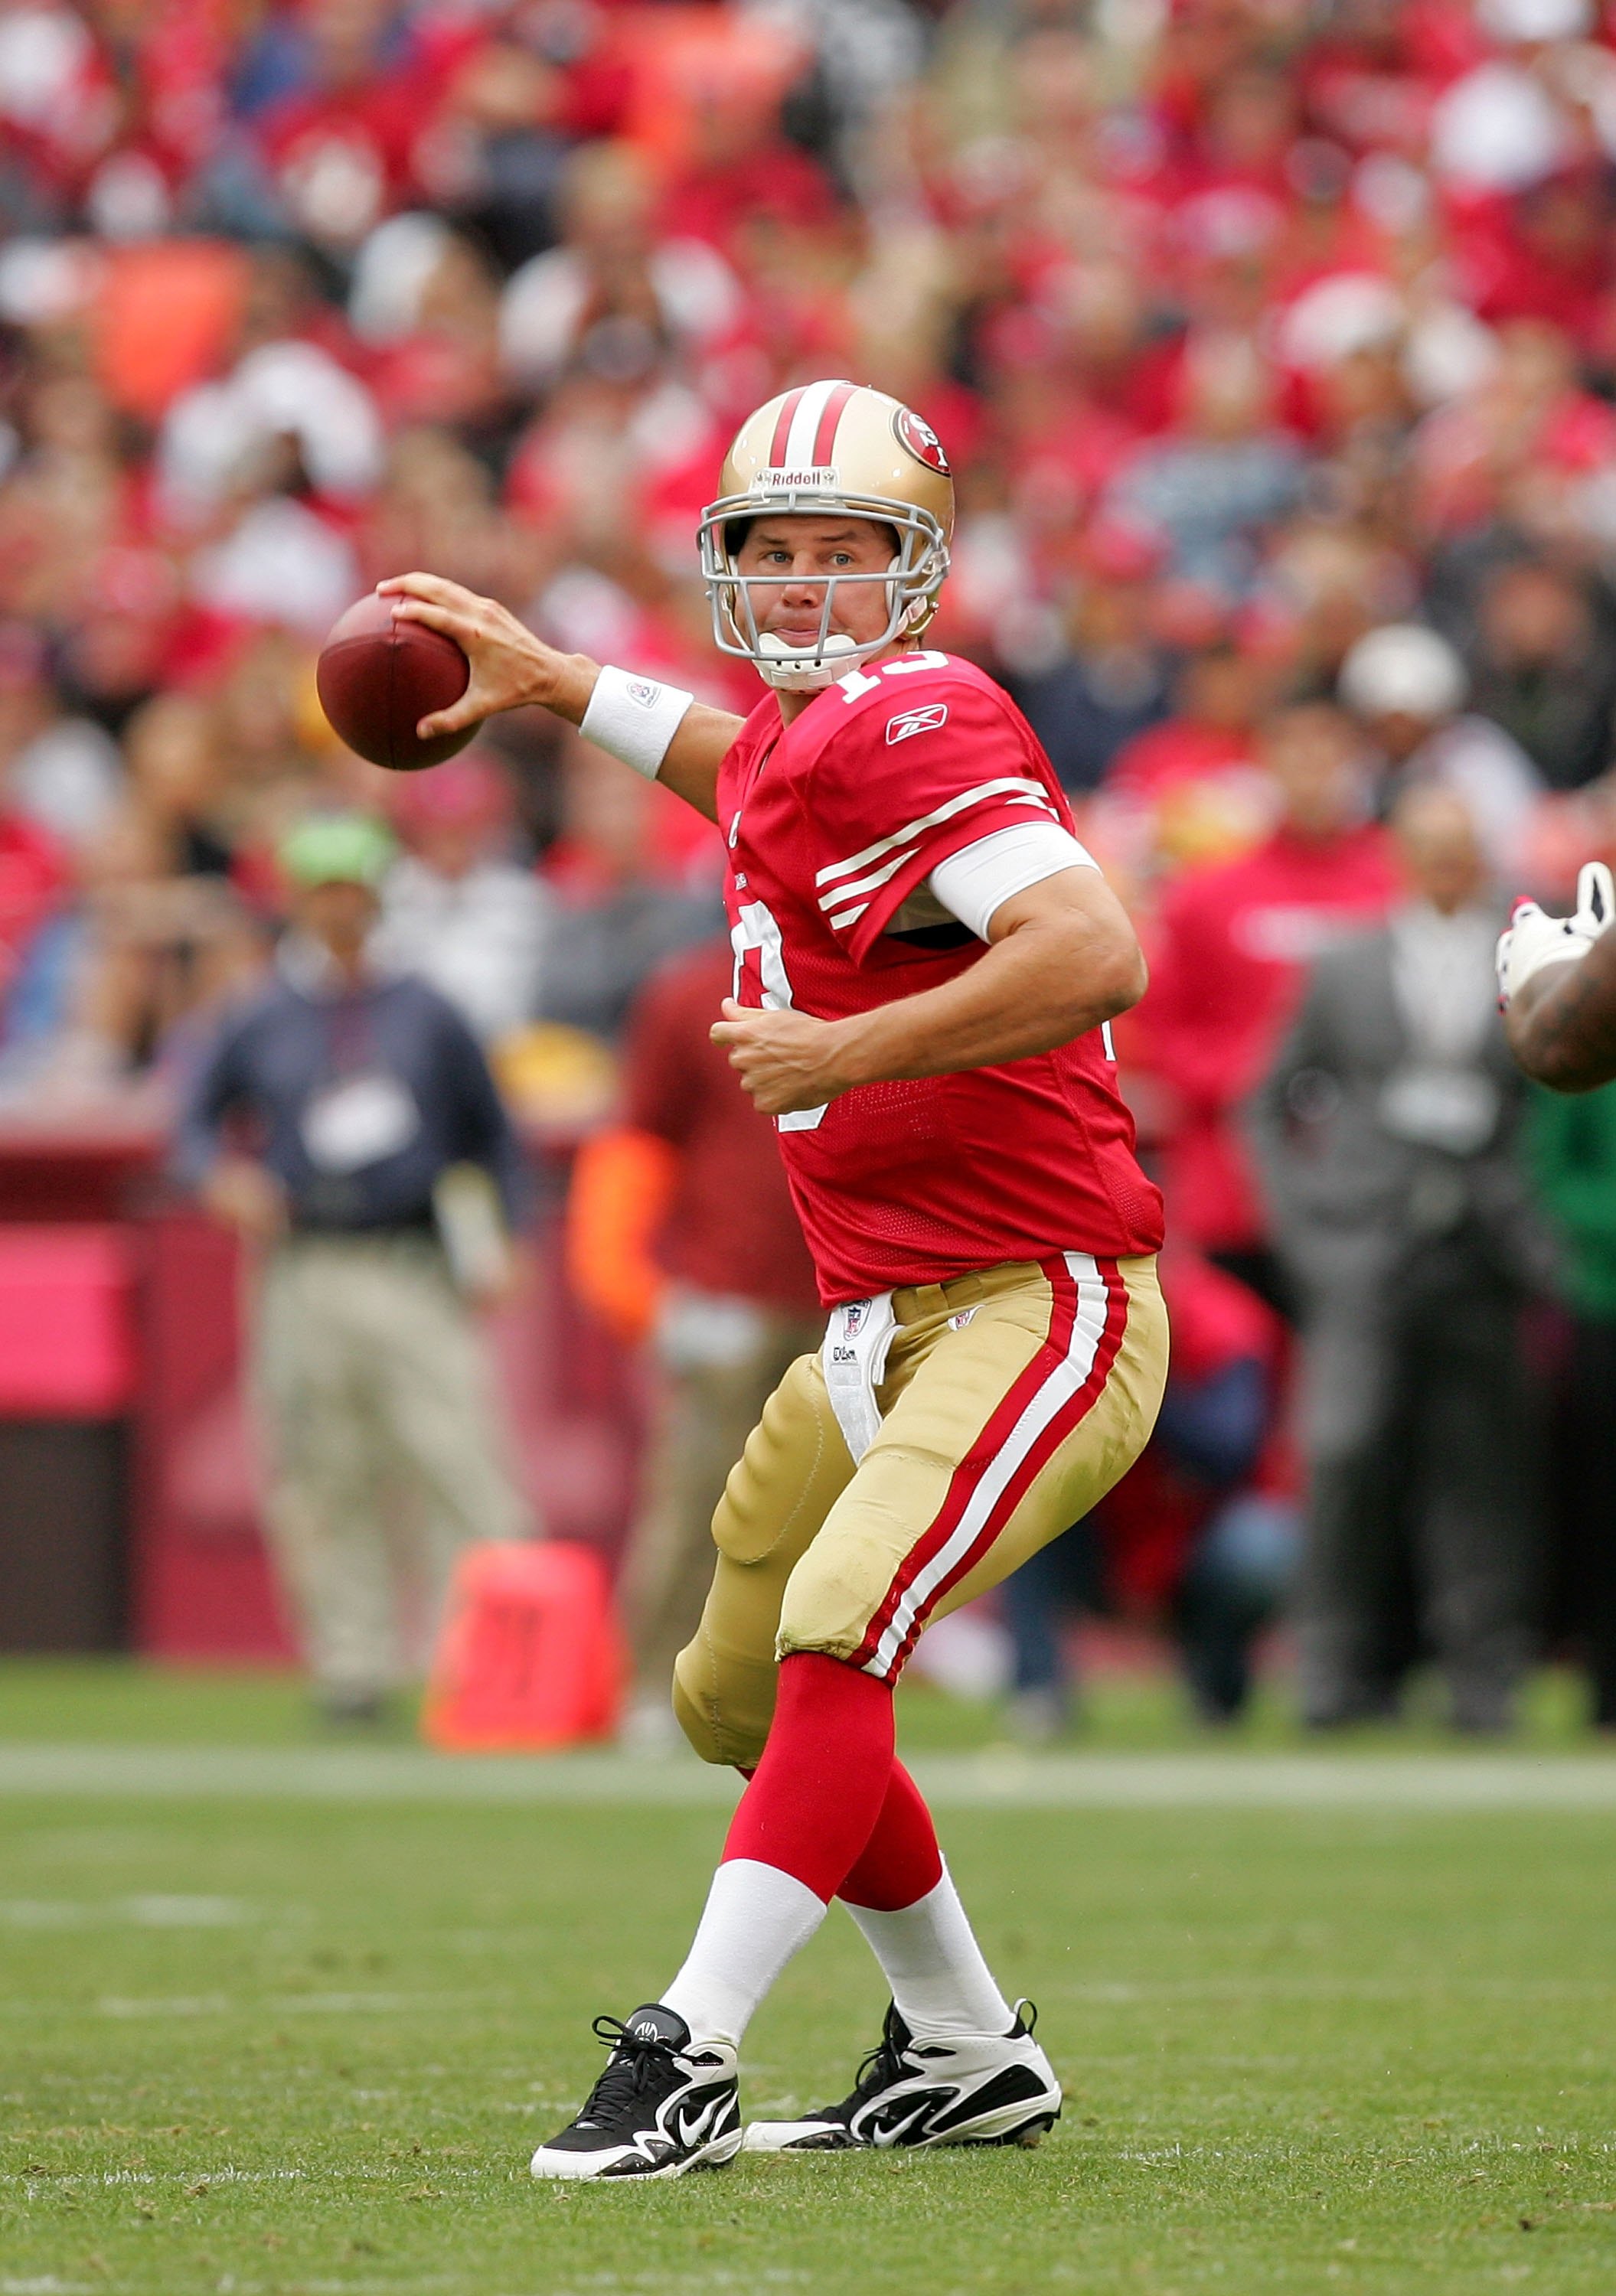 Shaun Hill Completes A Pass For The 49ers